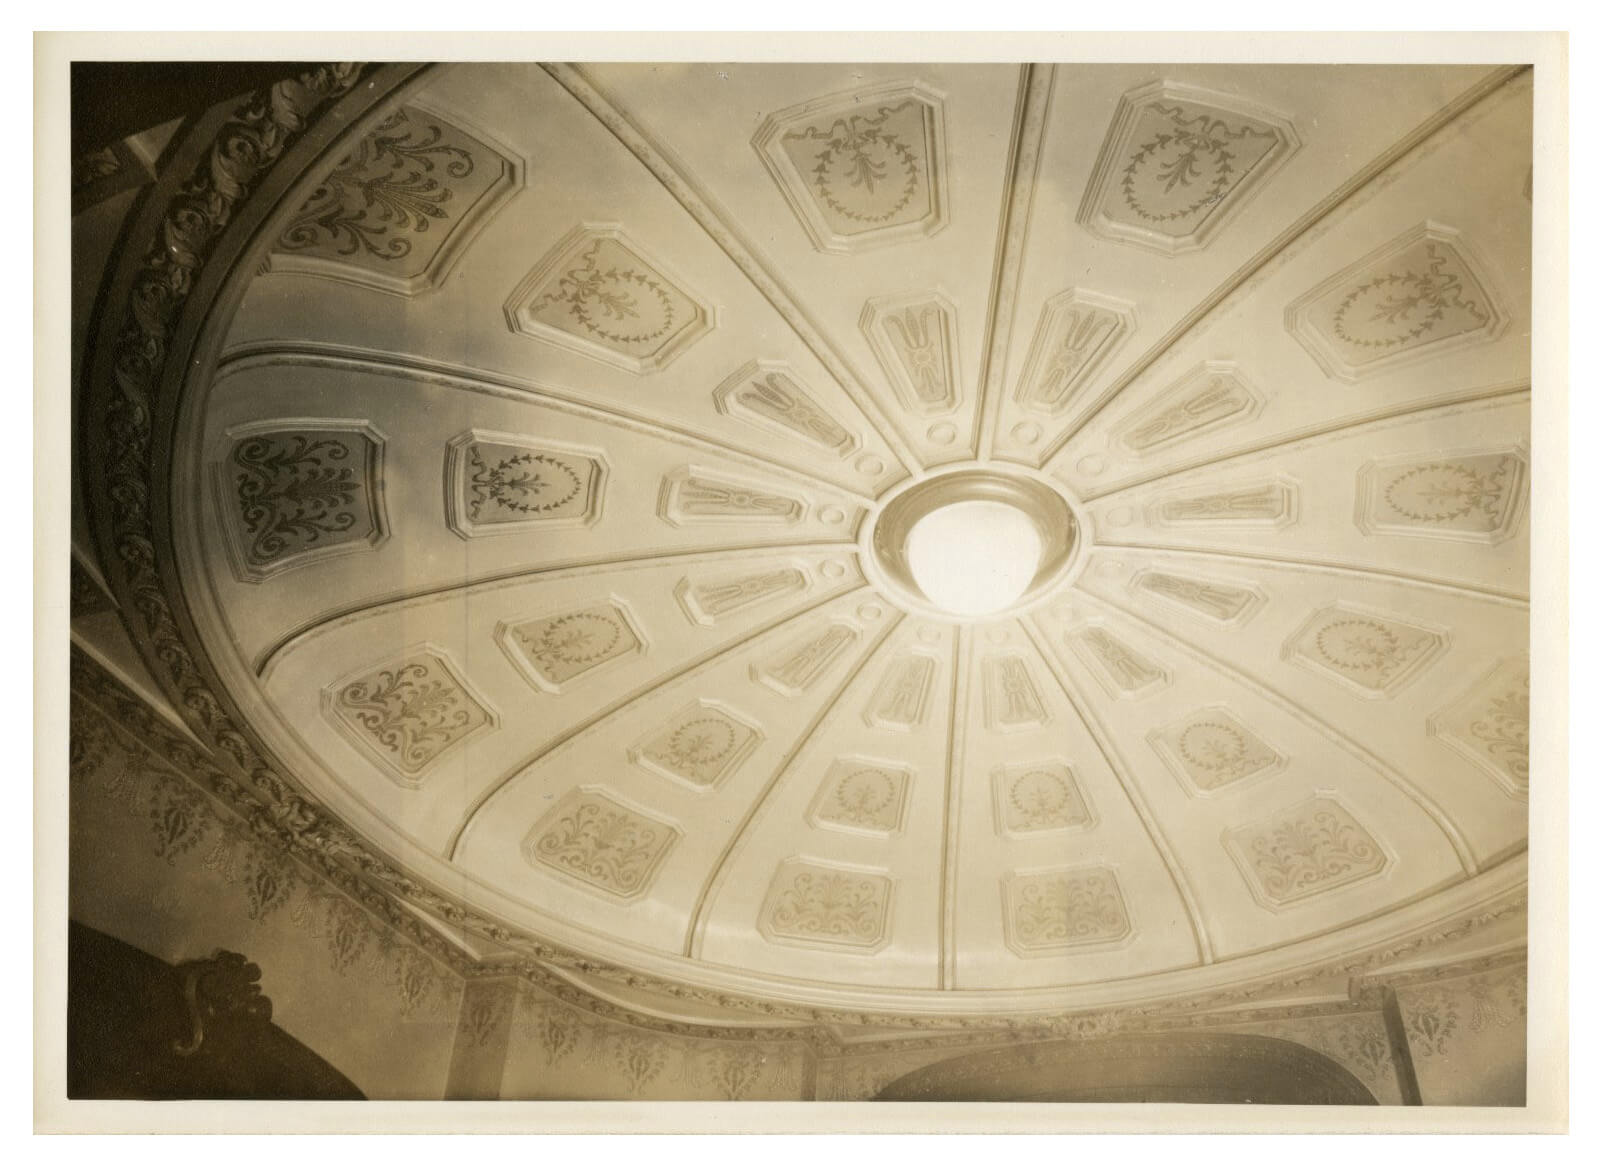 Ceiling Detail of 2 Pierrepont Place. Photo from Brooklyn Museum Libraries, Special Collections